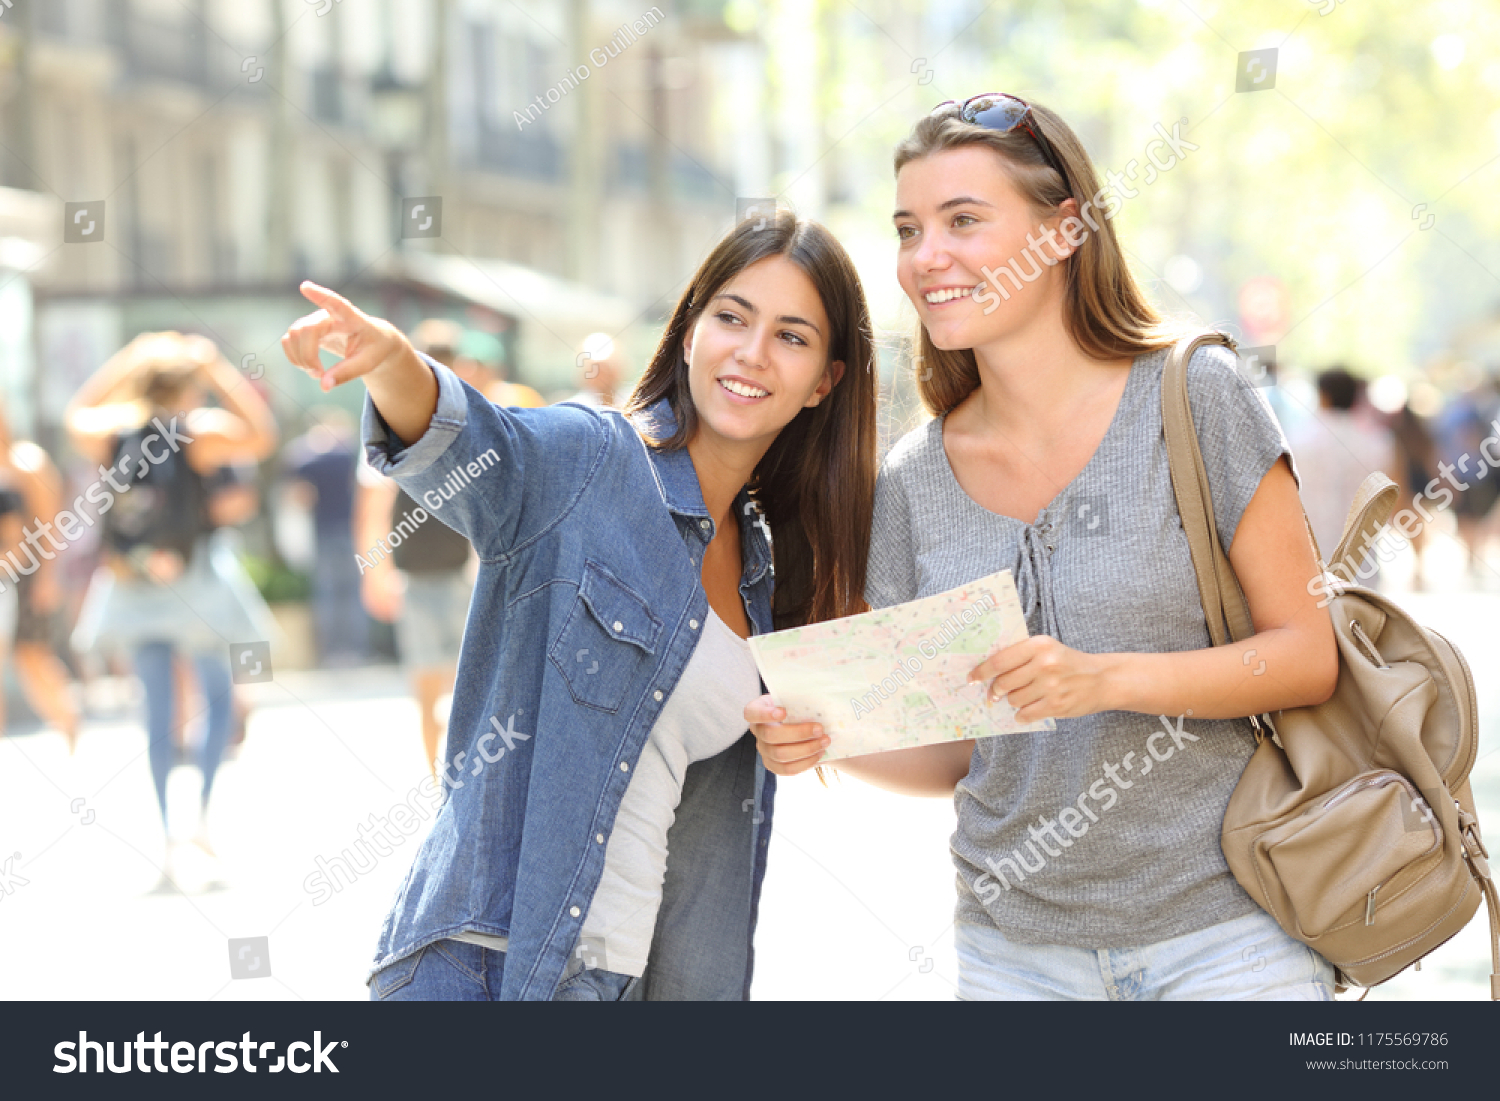 Happy girl helping to a tourist who asks direction in the street #1175569786